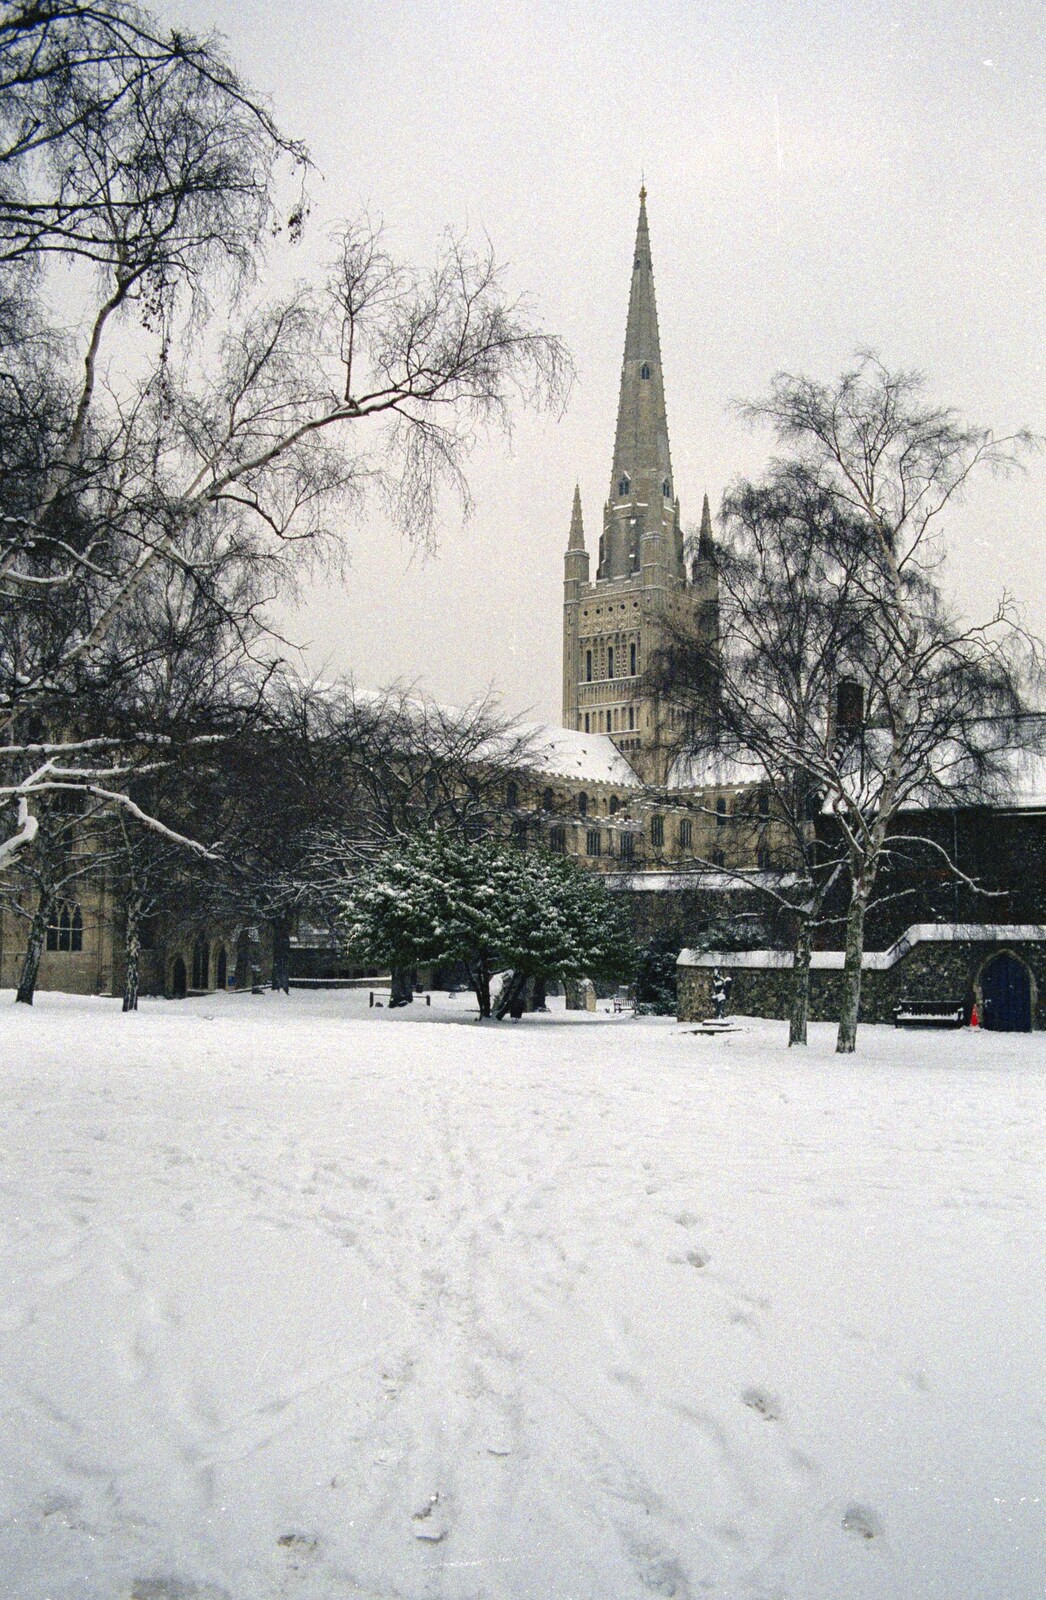 The spire of Norwich Cathedral from Snow Days, Stuston and Norwich, Suffolk and Norfolk - 4th February 1991